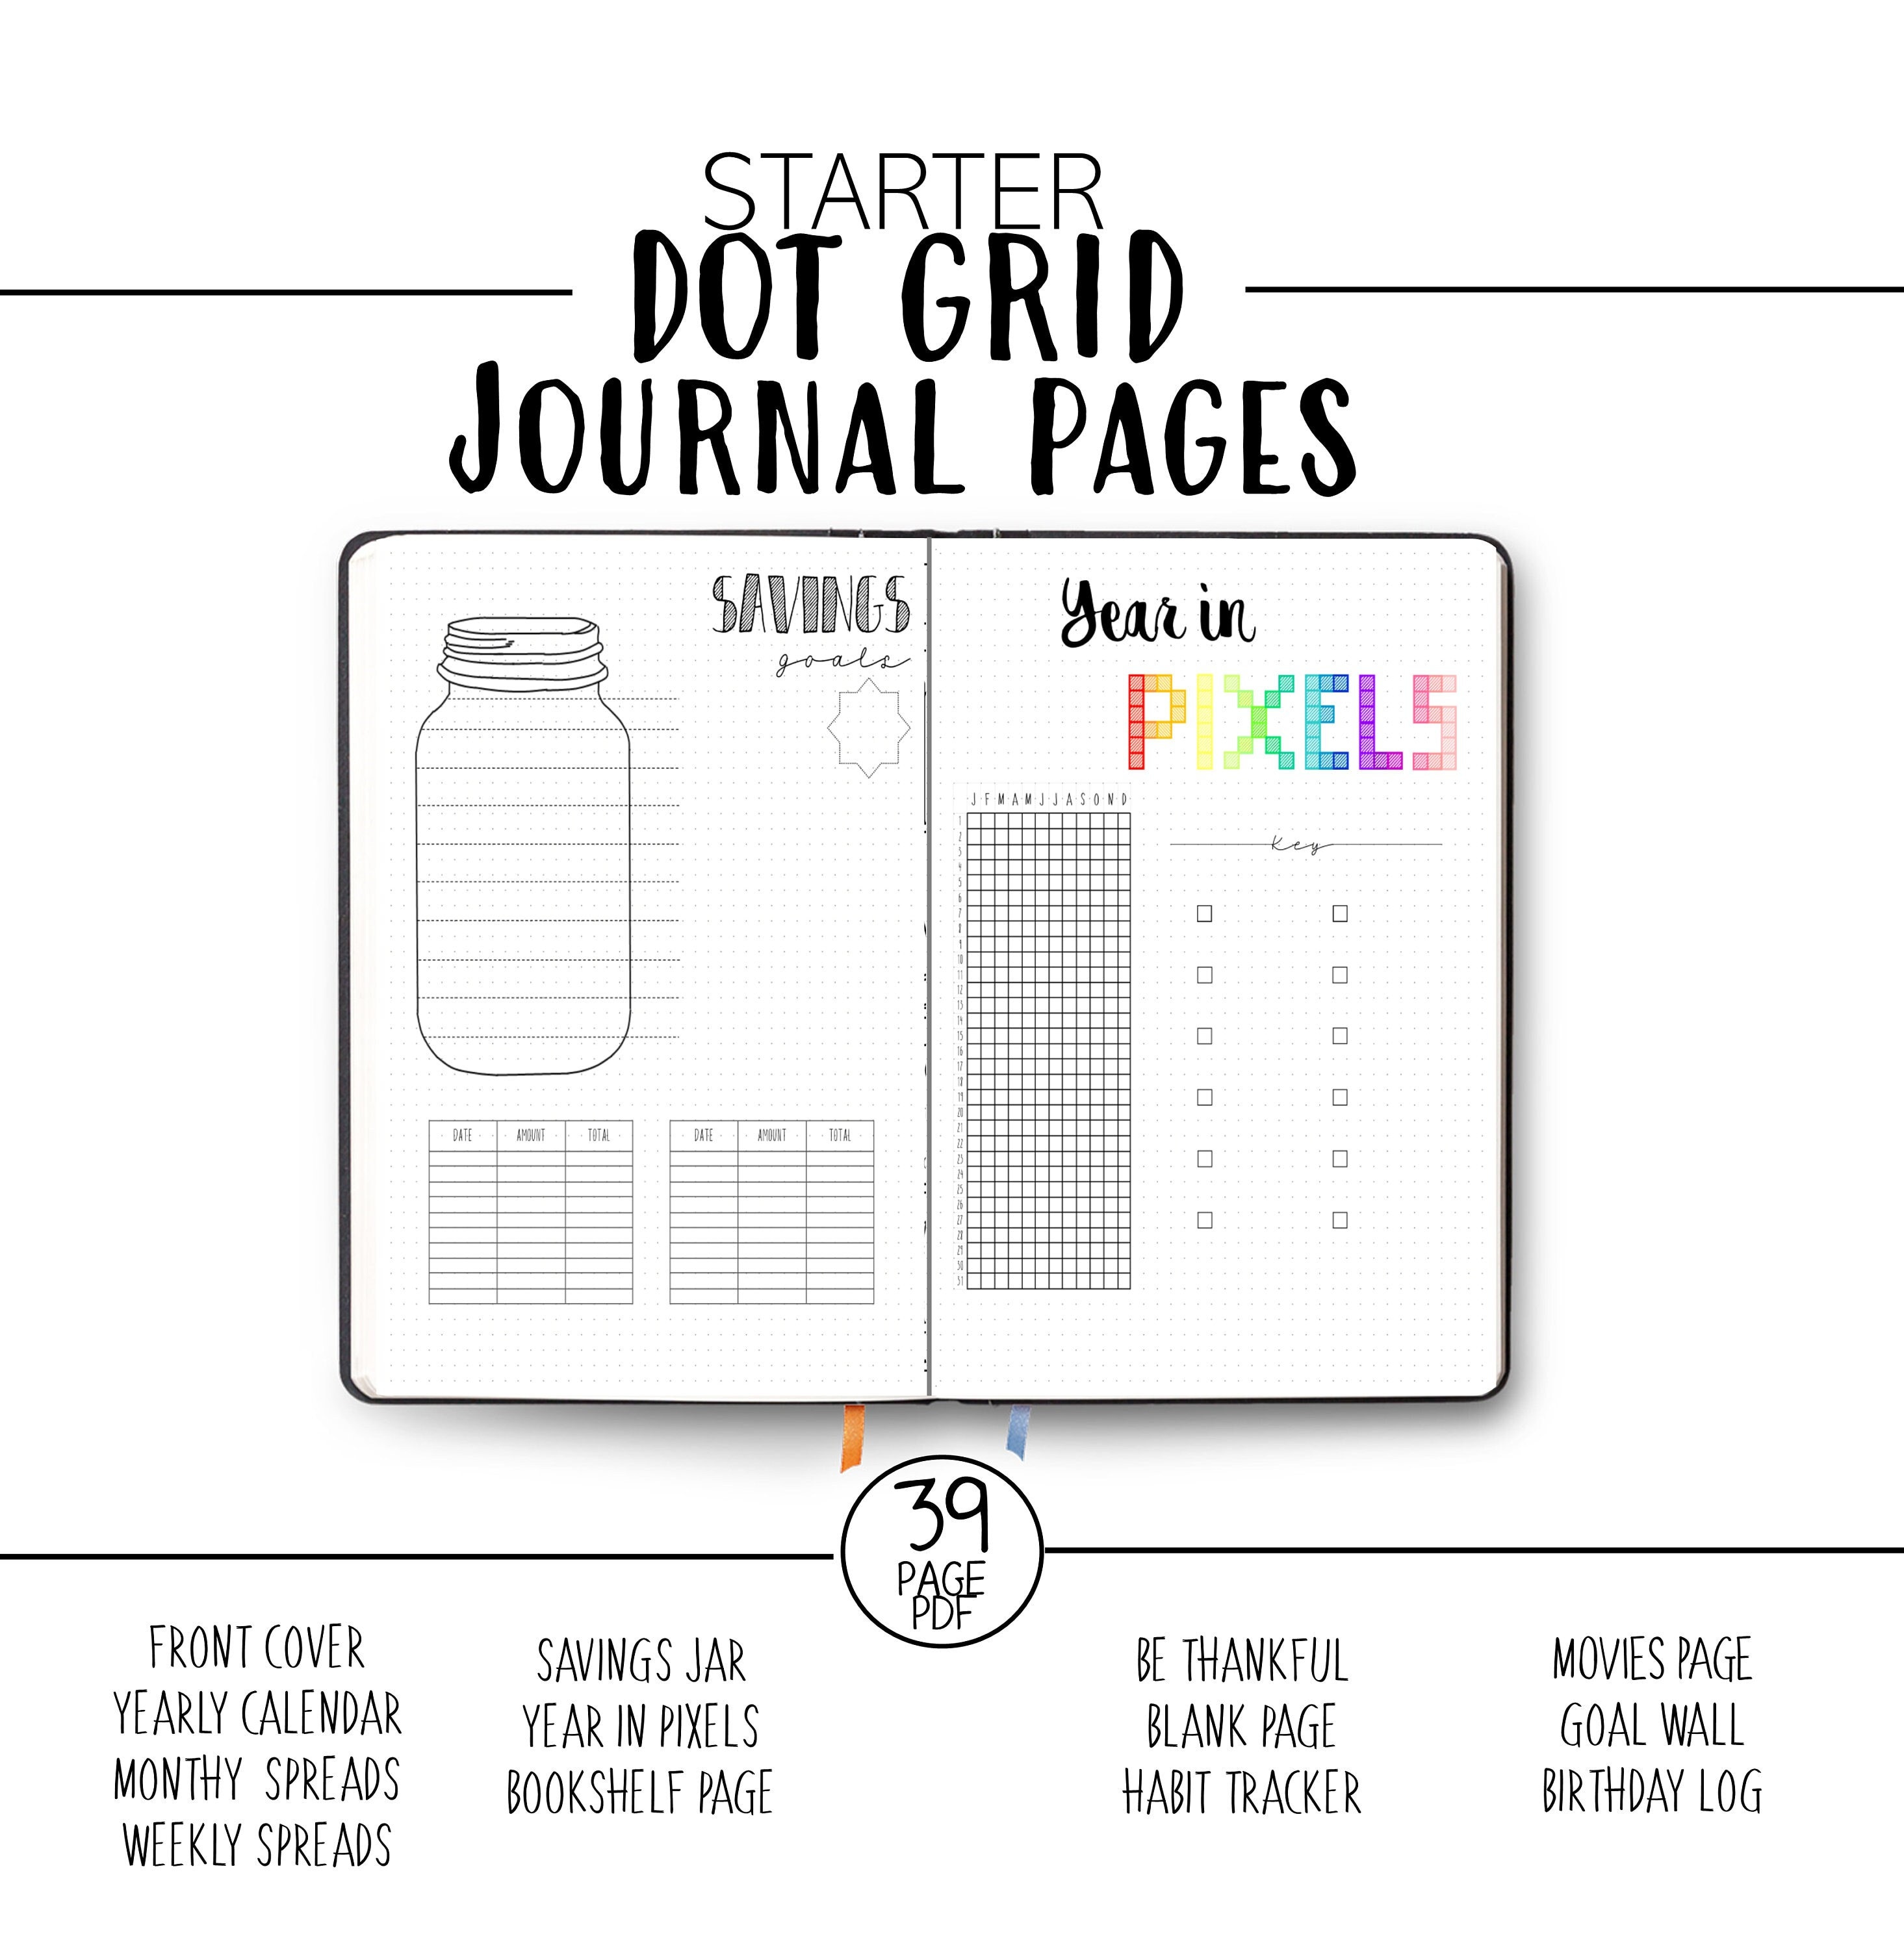 Grid, Dot or Plain: Which Journal Pages Are Best?